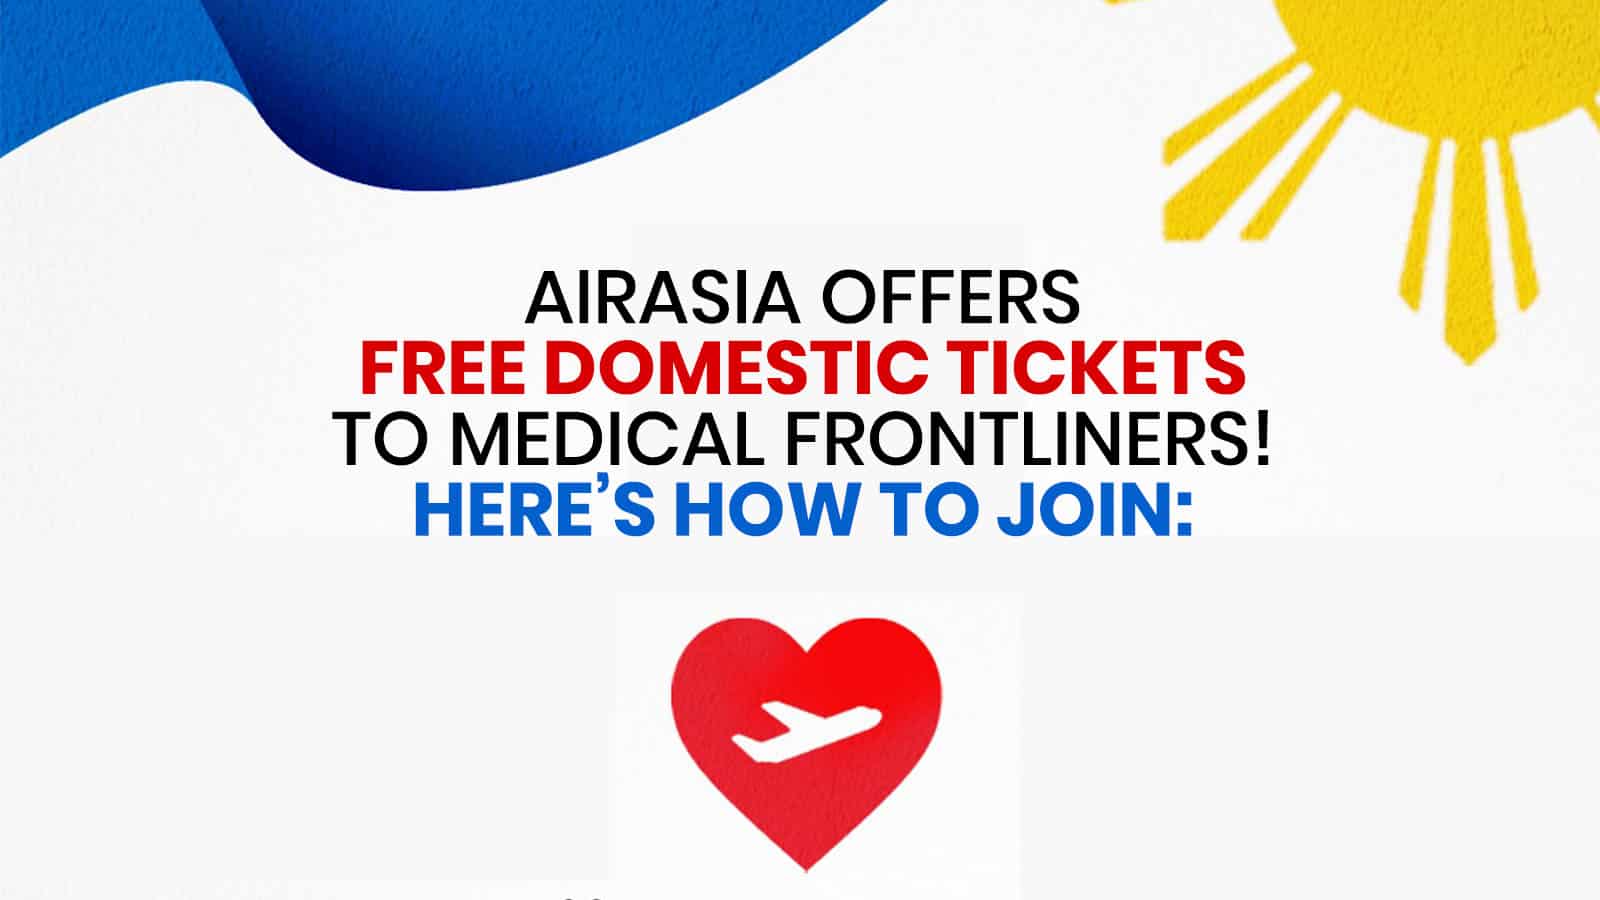 FREE AIRASIA TICKETS for Medical Frontliners: Here’s How to Join!